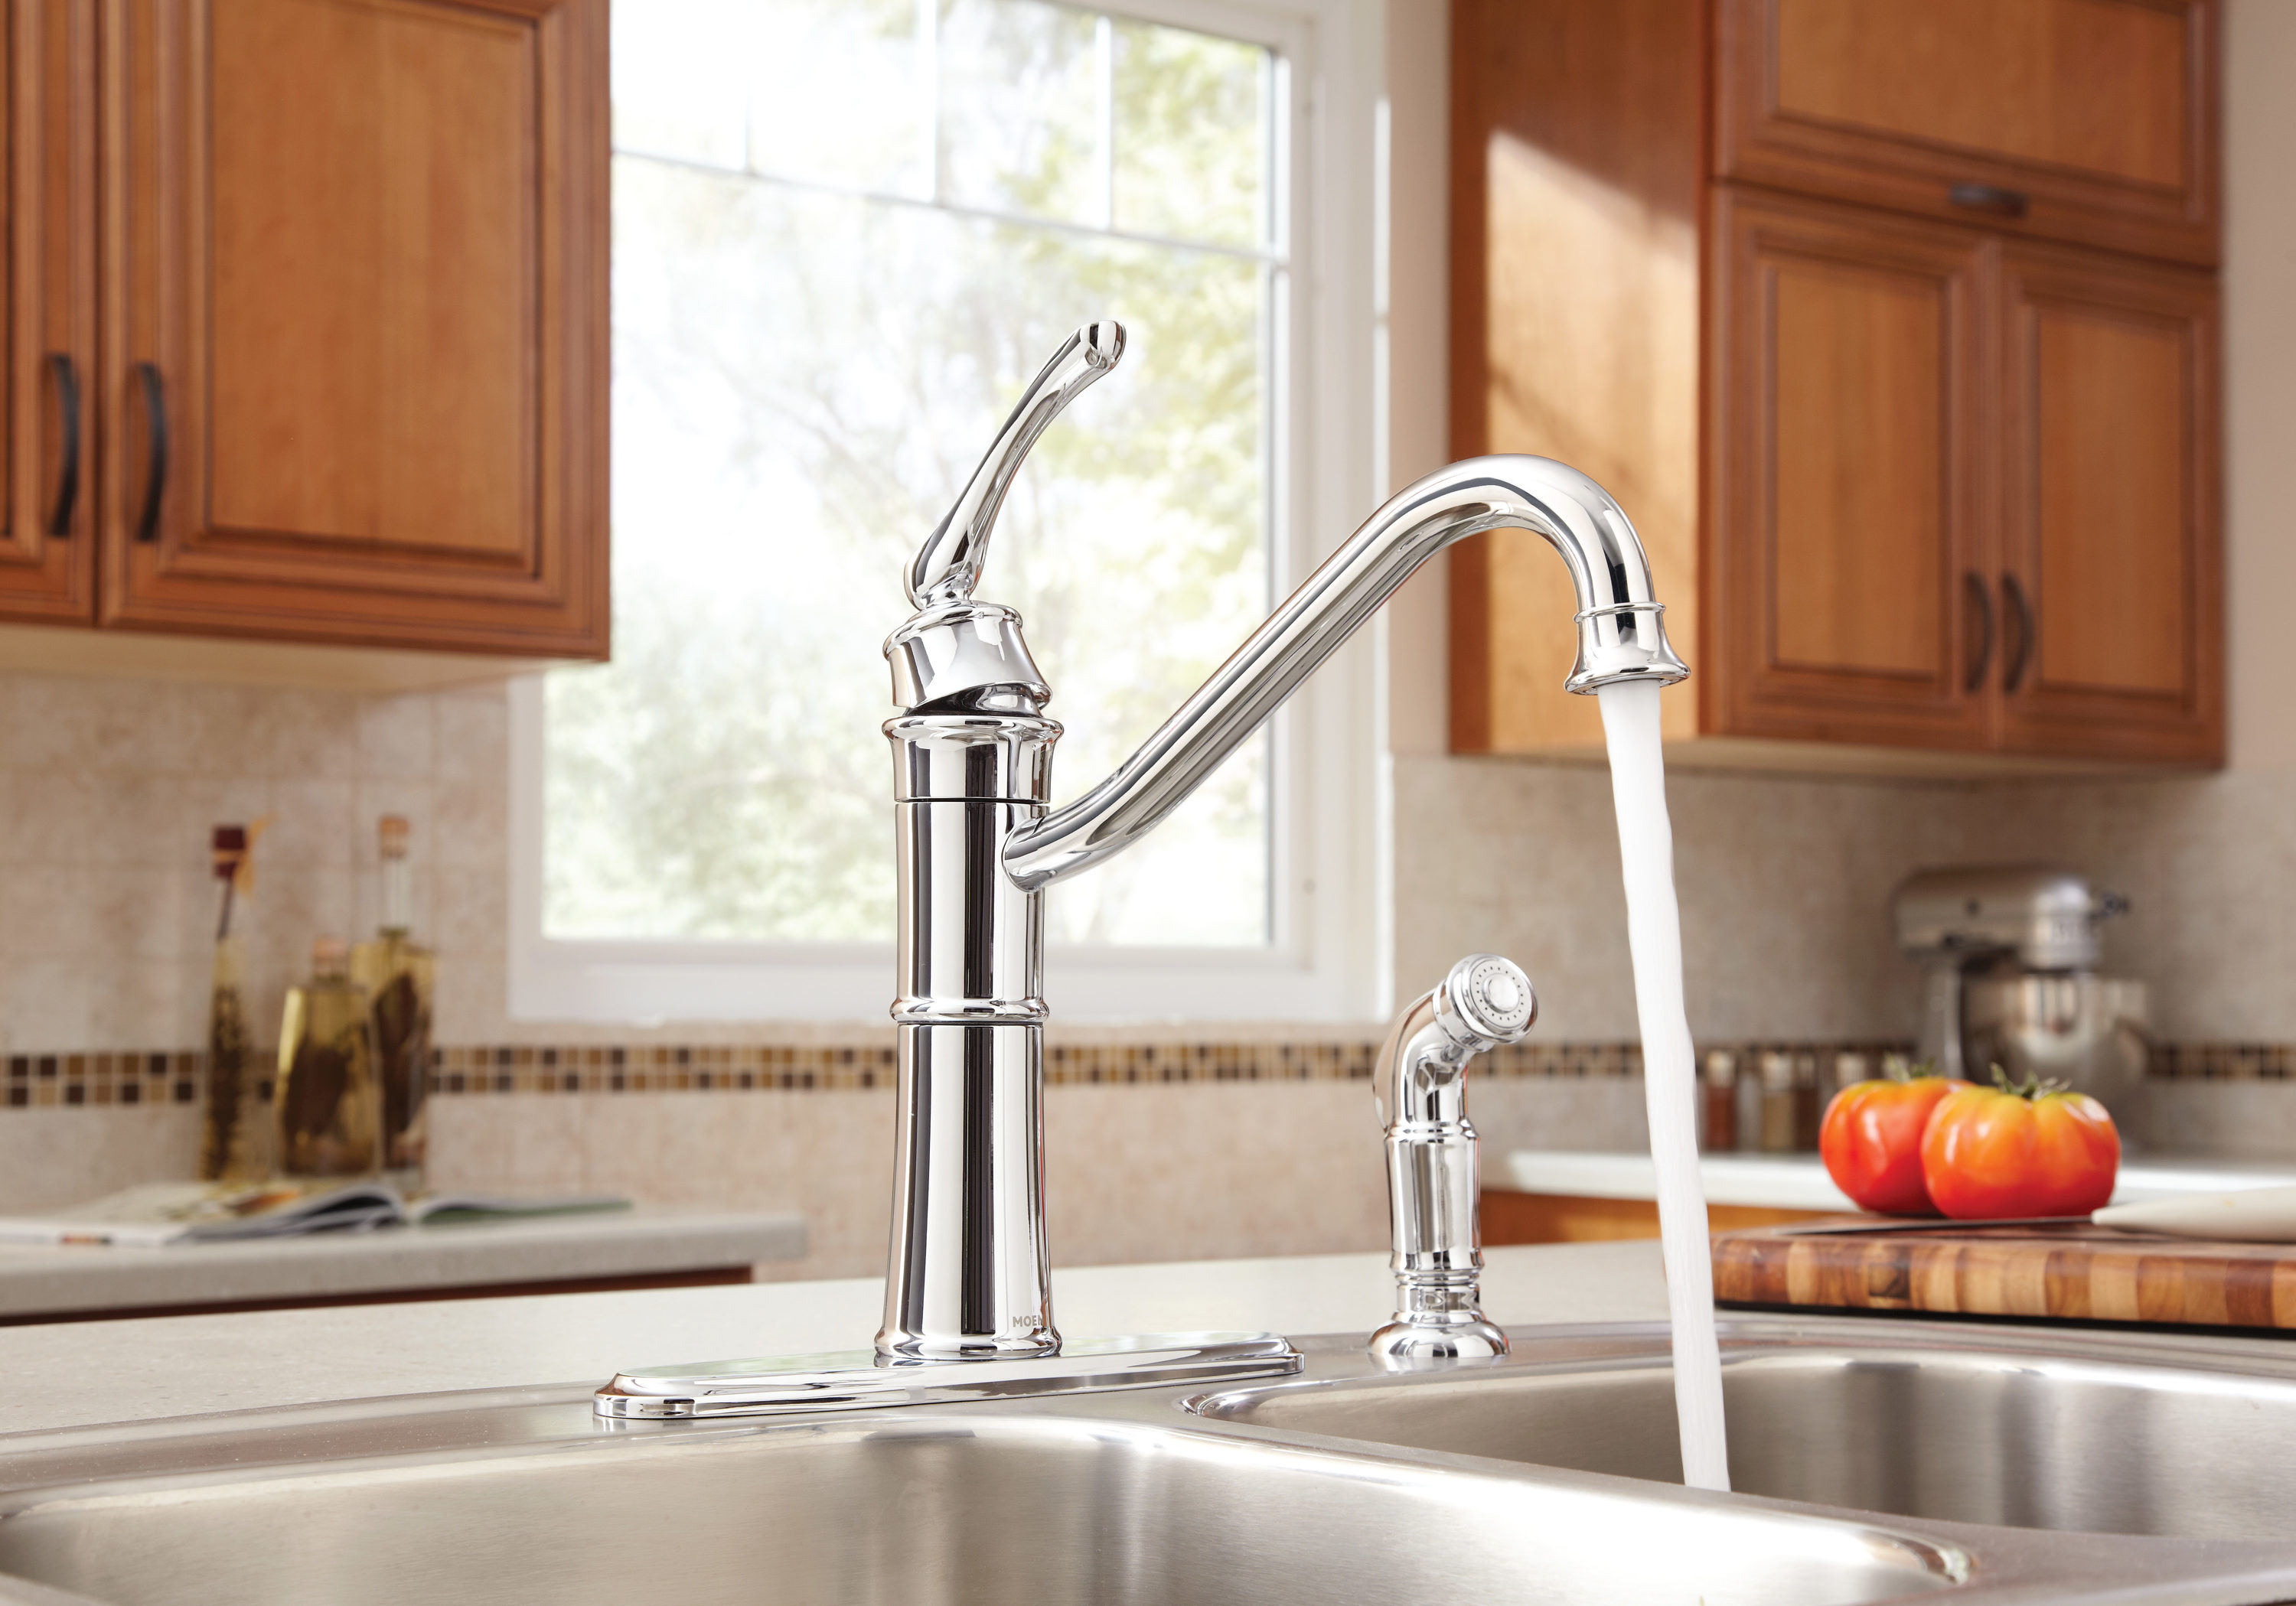 Moen Wetherly Chrome Single Handle High-arc Kitchen Faucet with Deck Plate  and Side Spray Included at